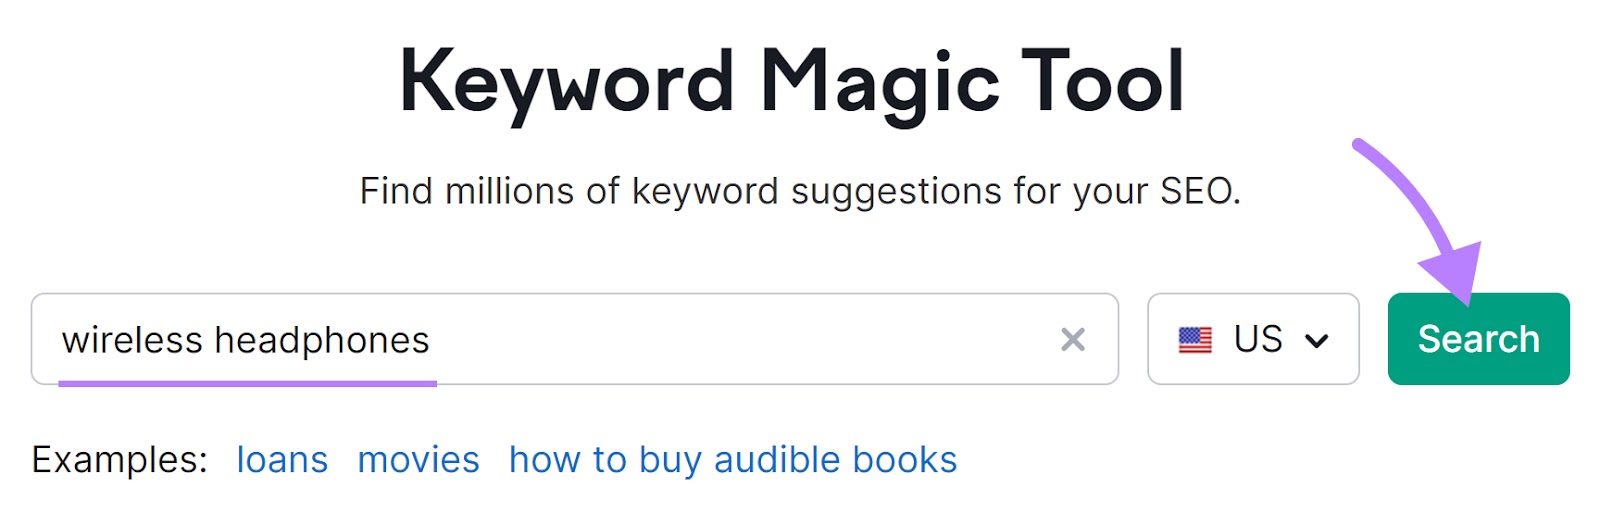 “wireless headphones" entered into the Keyword Magic Tool search bar